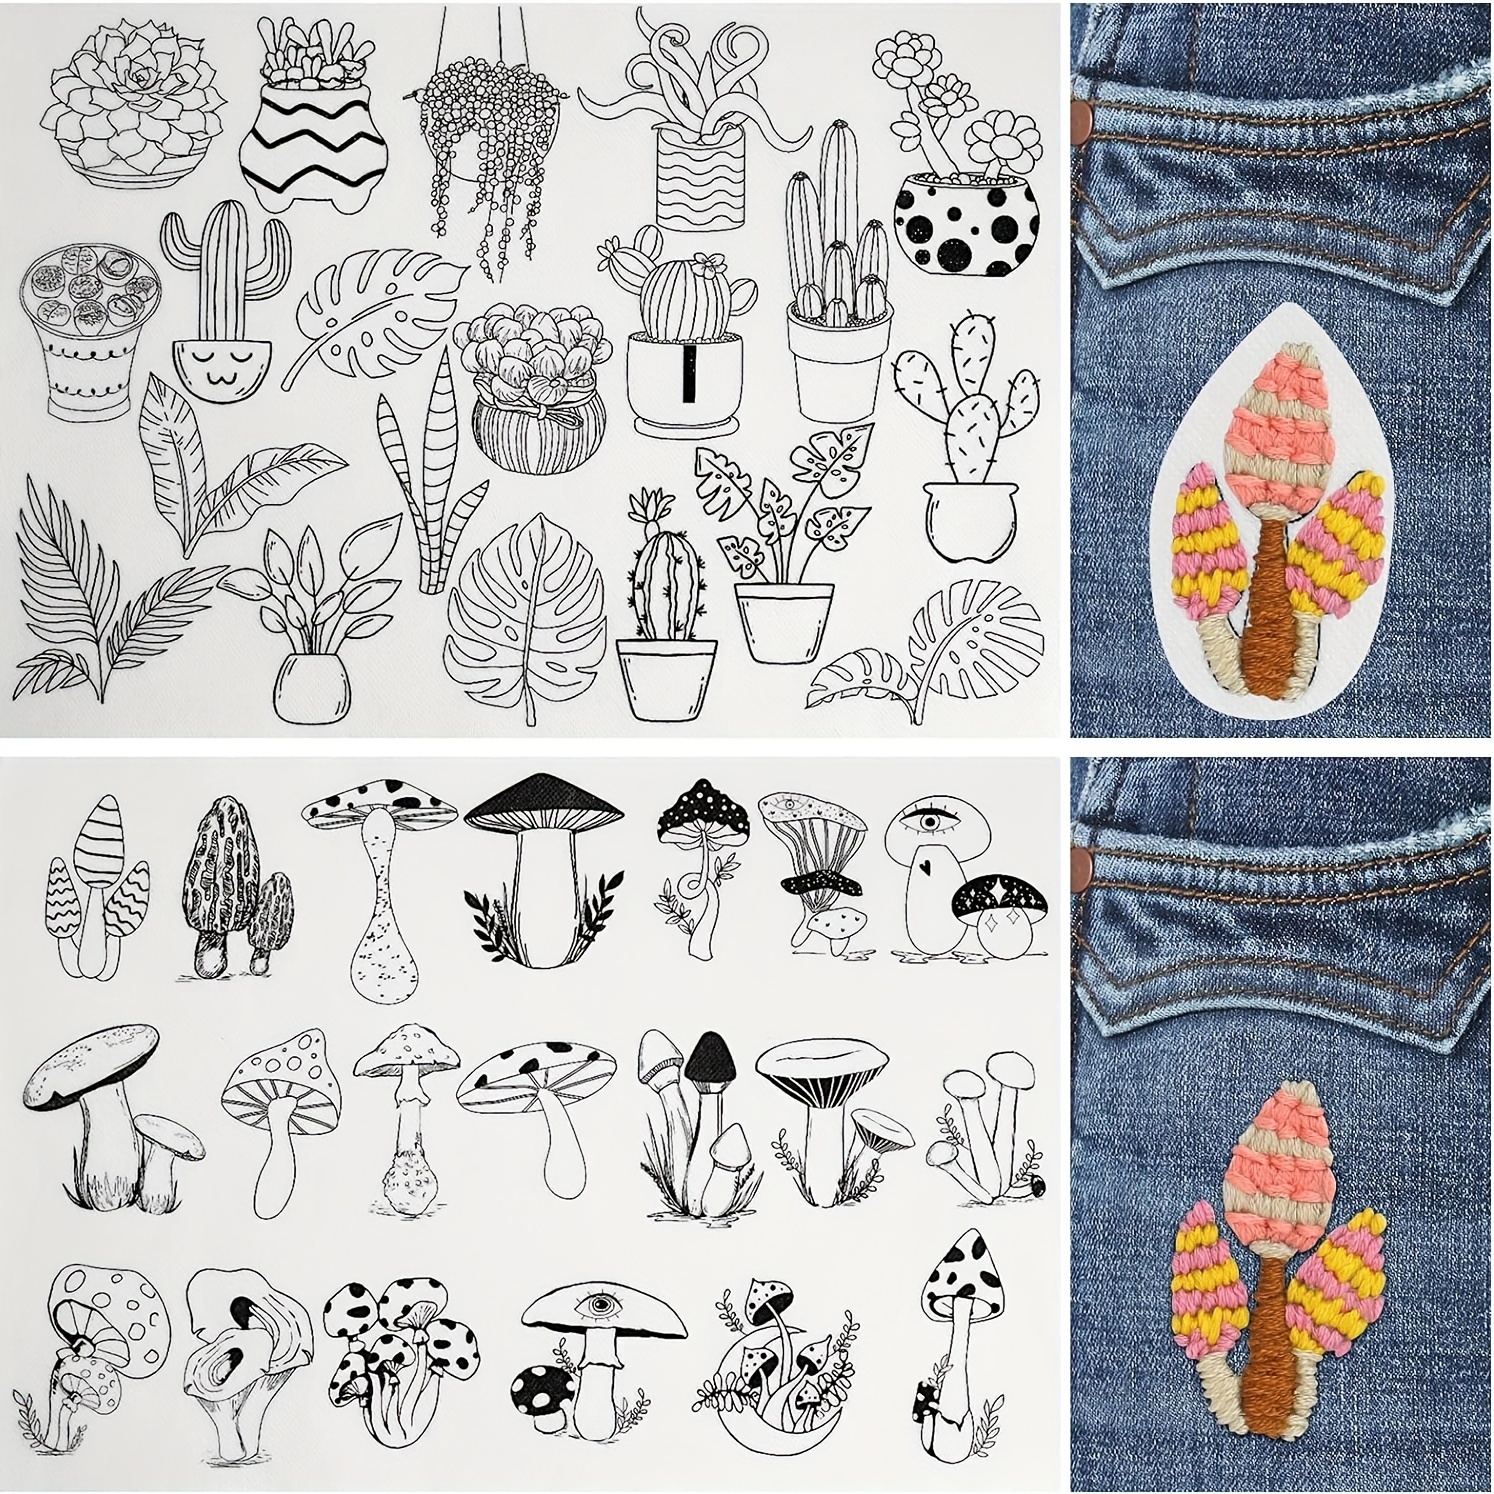 Water Soluble Embroidery Patterns Embroidery Patterns - Temu